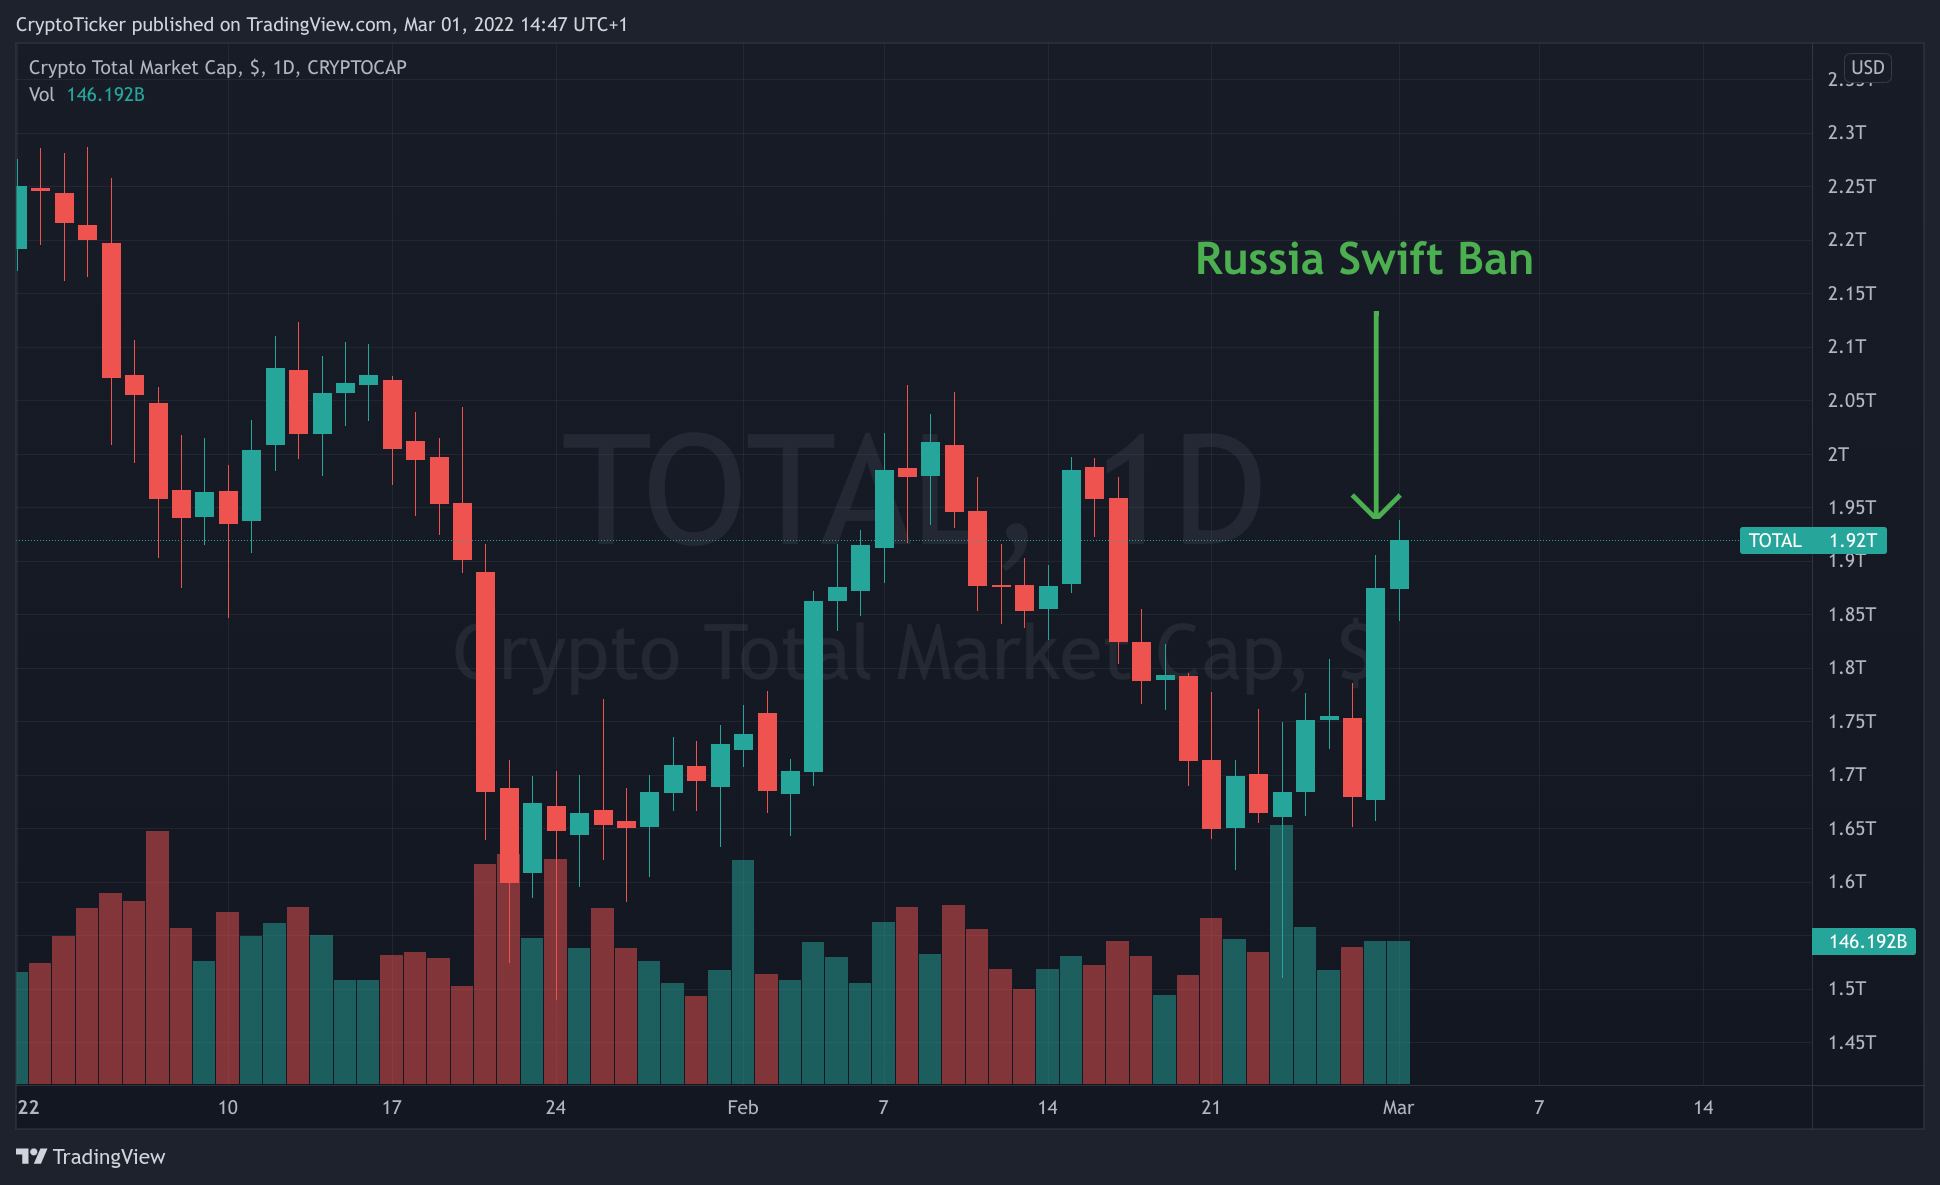 Total Crypto market 1-day chart showing the jump on the Swift Ban news